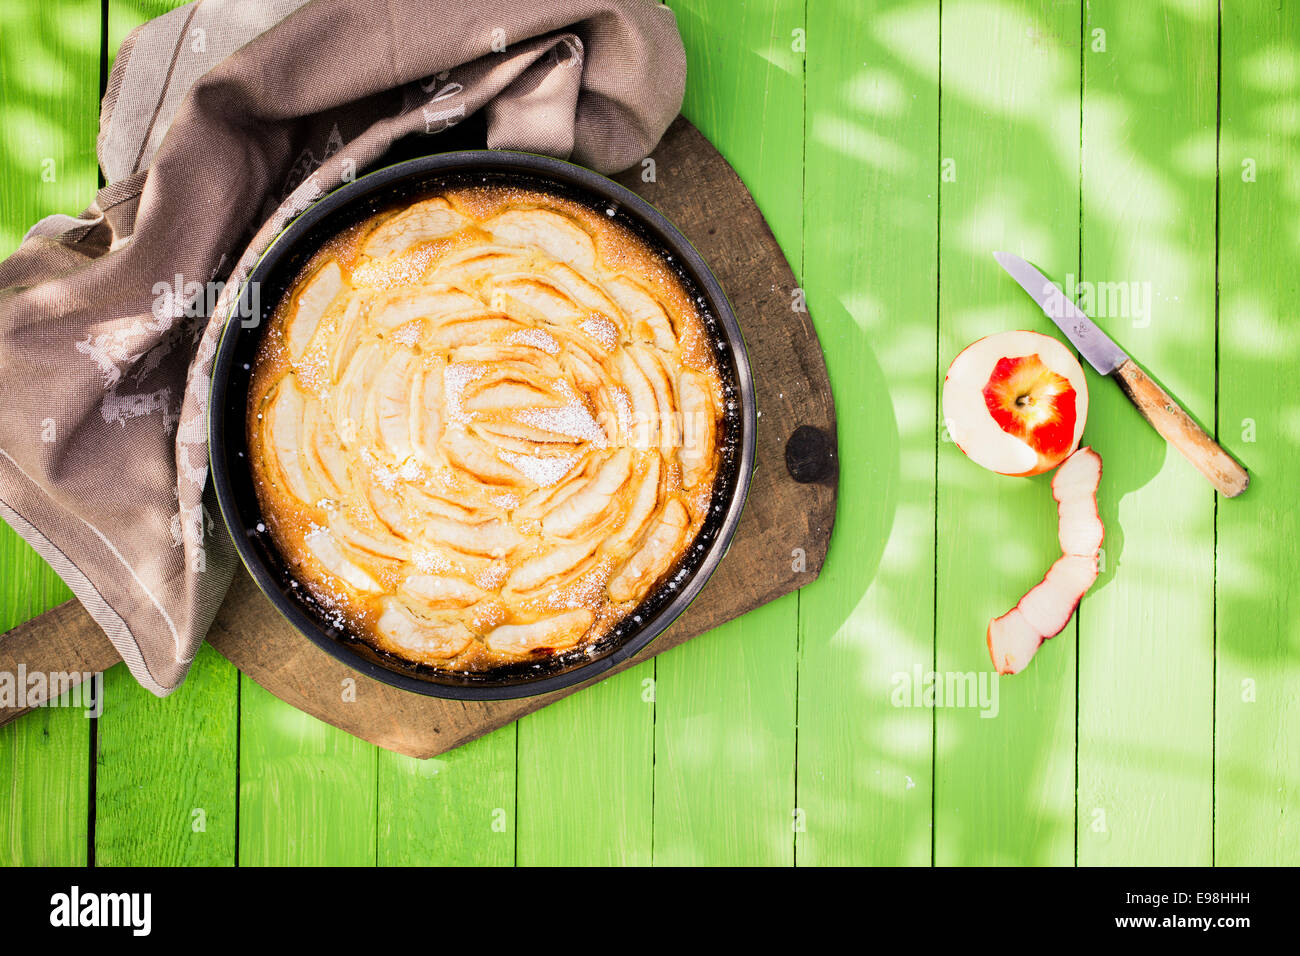 Delicious golden home baked apple pie viewed from above in an oven dish on a green wooden garden table in dappled sunlight for a relaxing summer meal and dessert Stock Photo